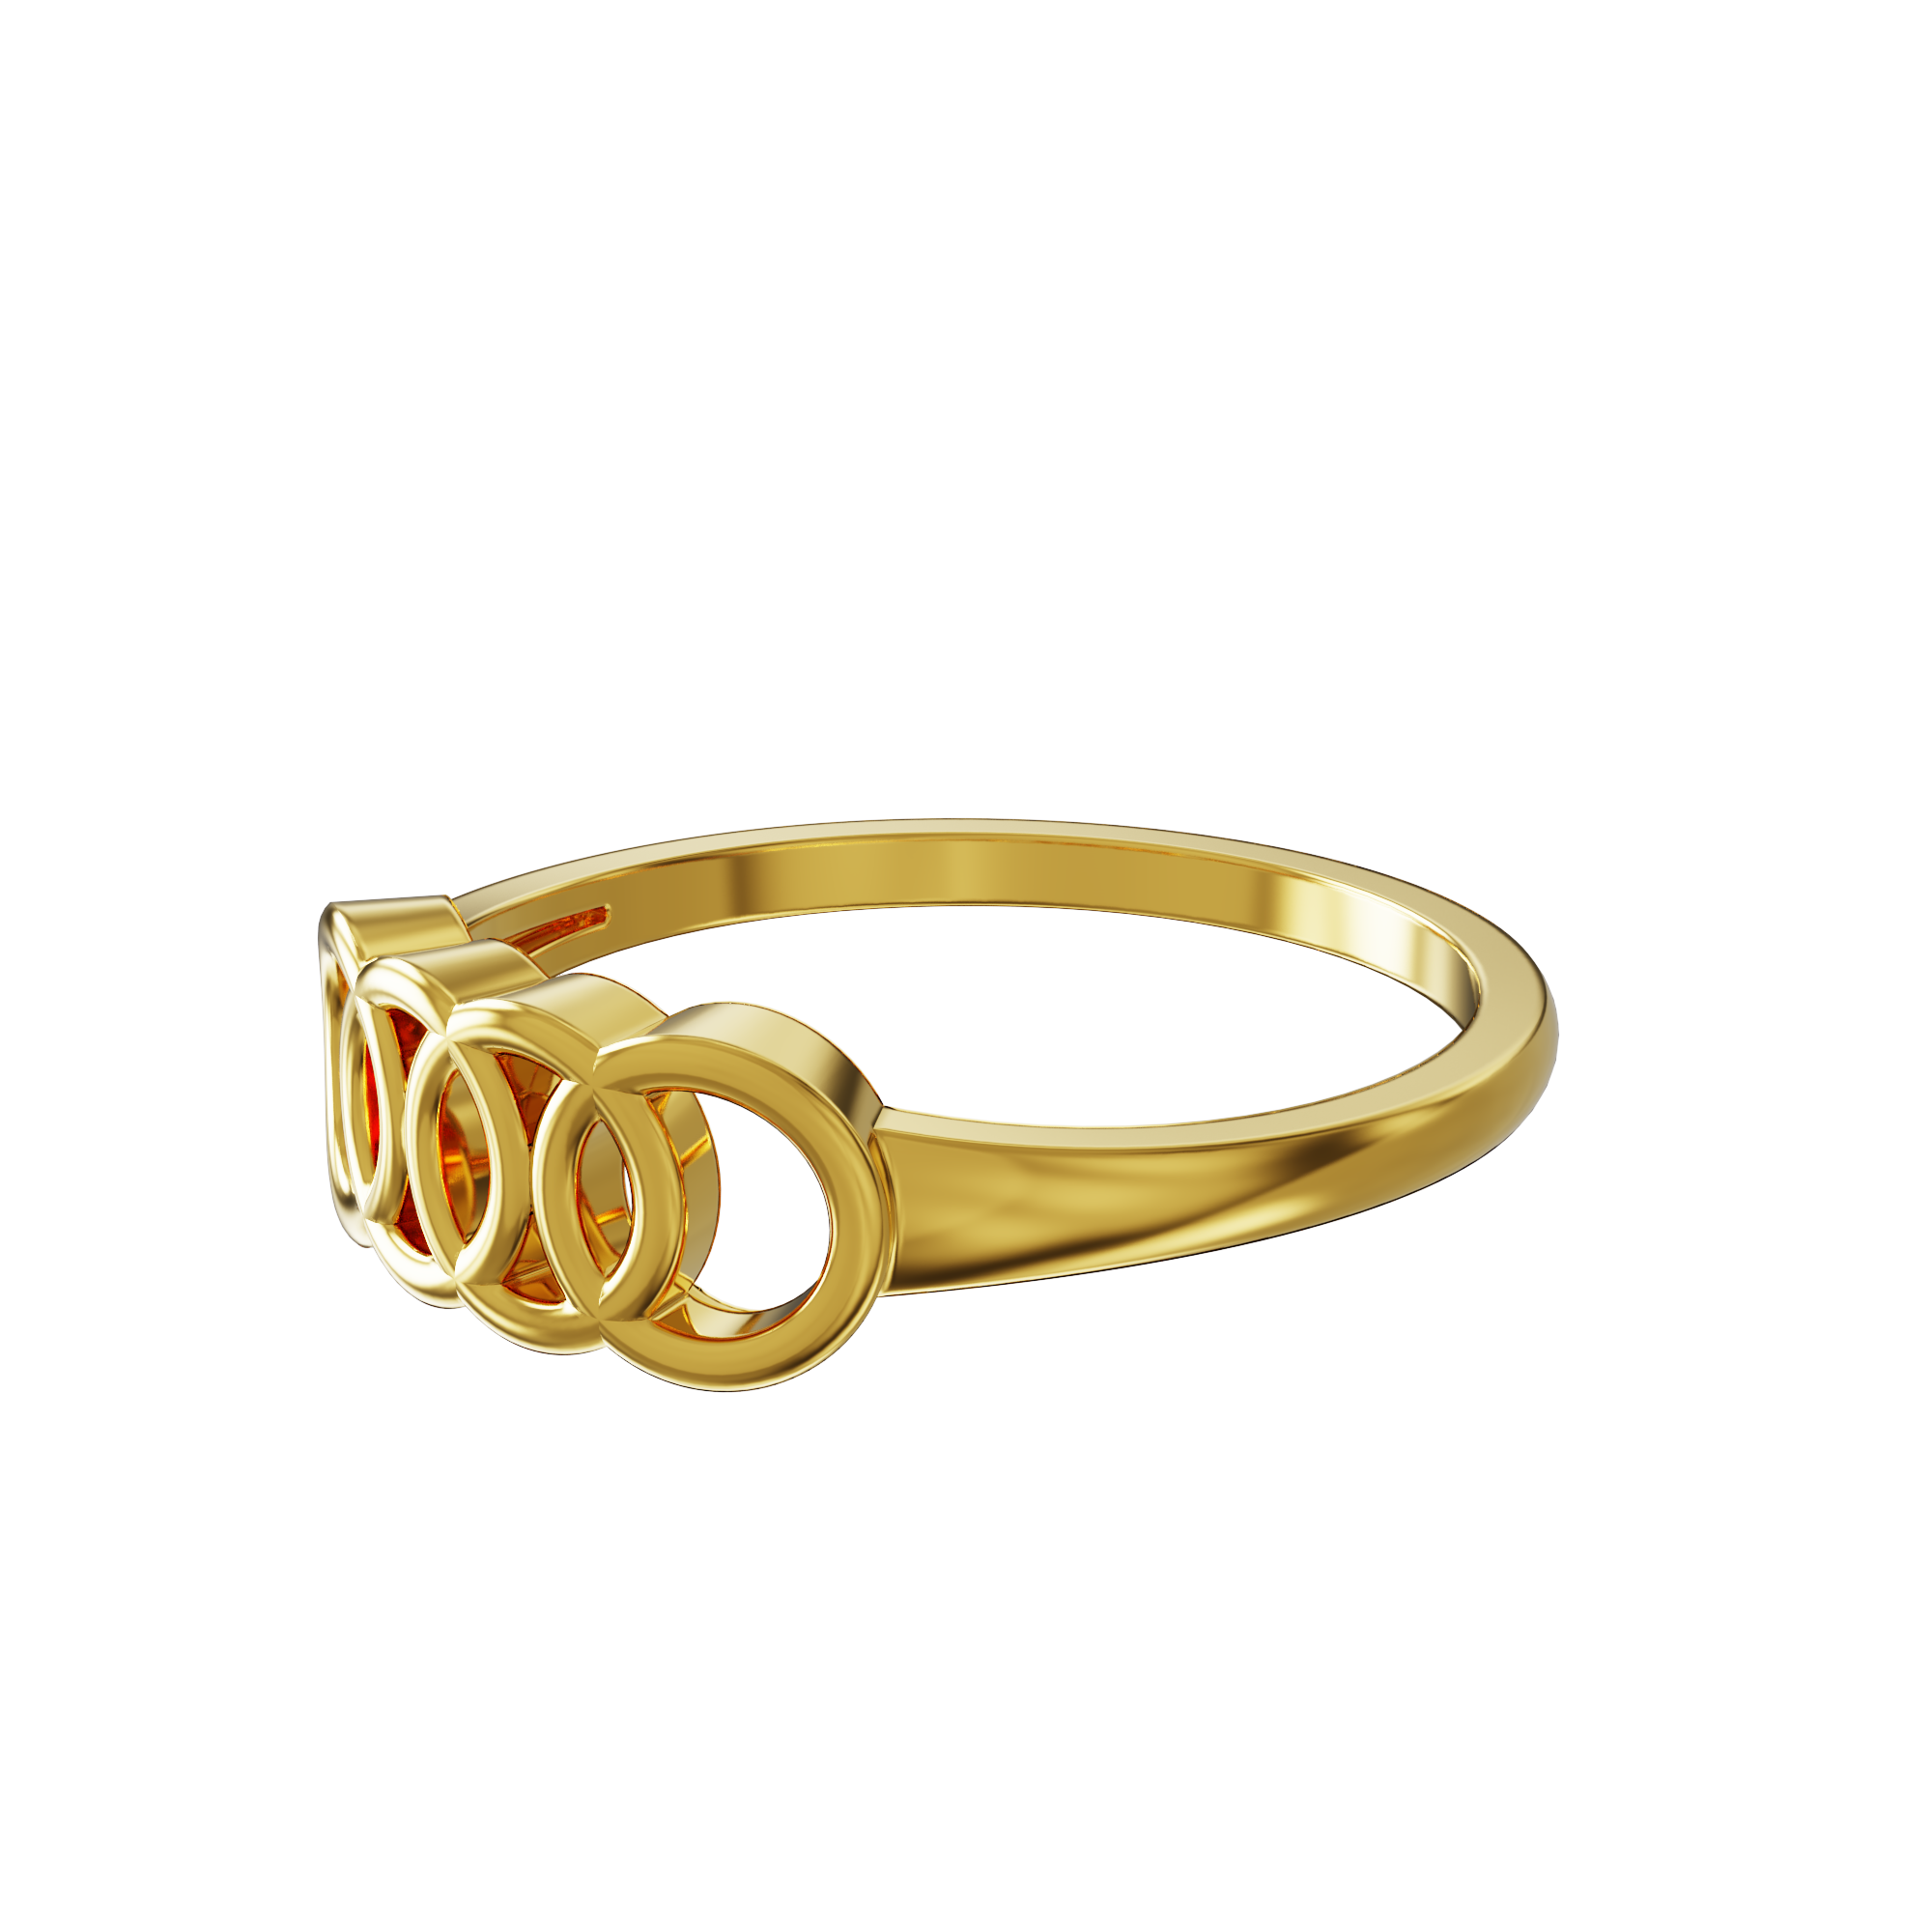 Feiboyy Gold Filled Stacking Rings For Women Girls Thin Gold Ring Stackable Plain  Thumb Pinky Band Non Tarnish Comfort - Walmart.com